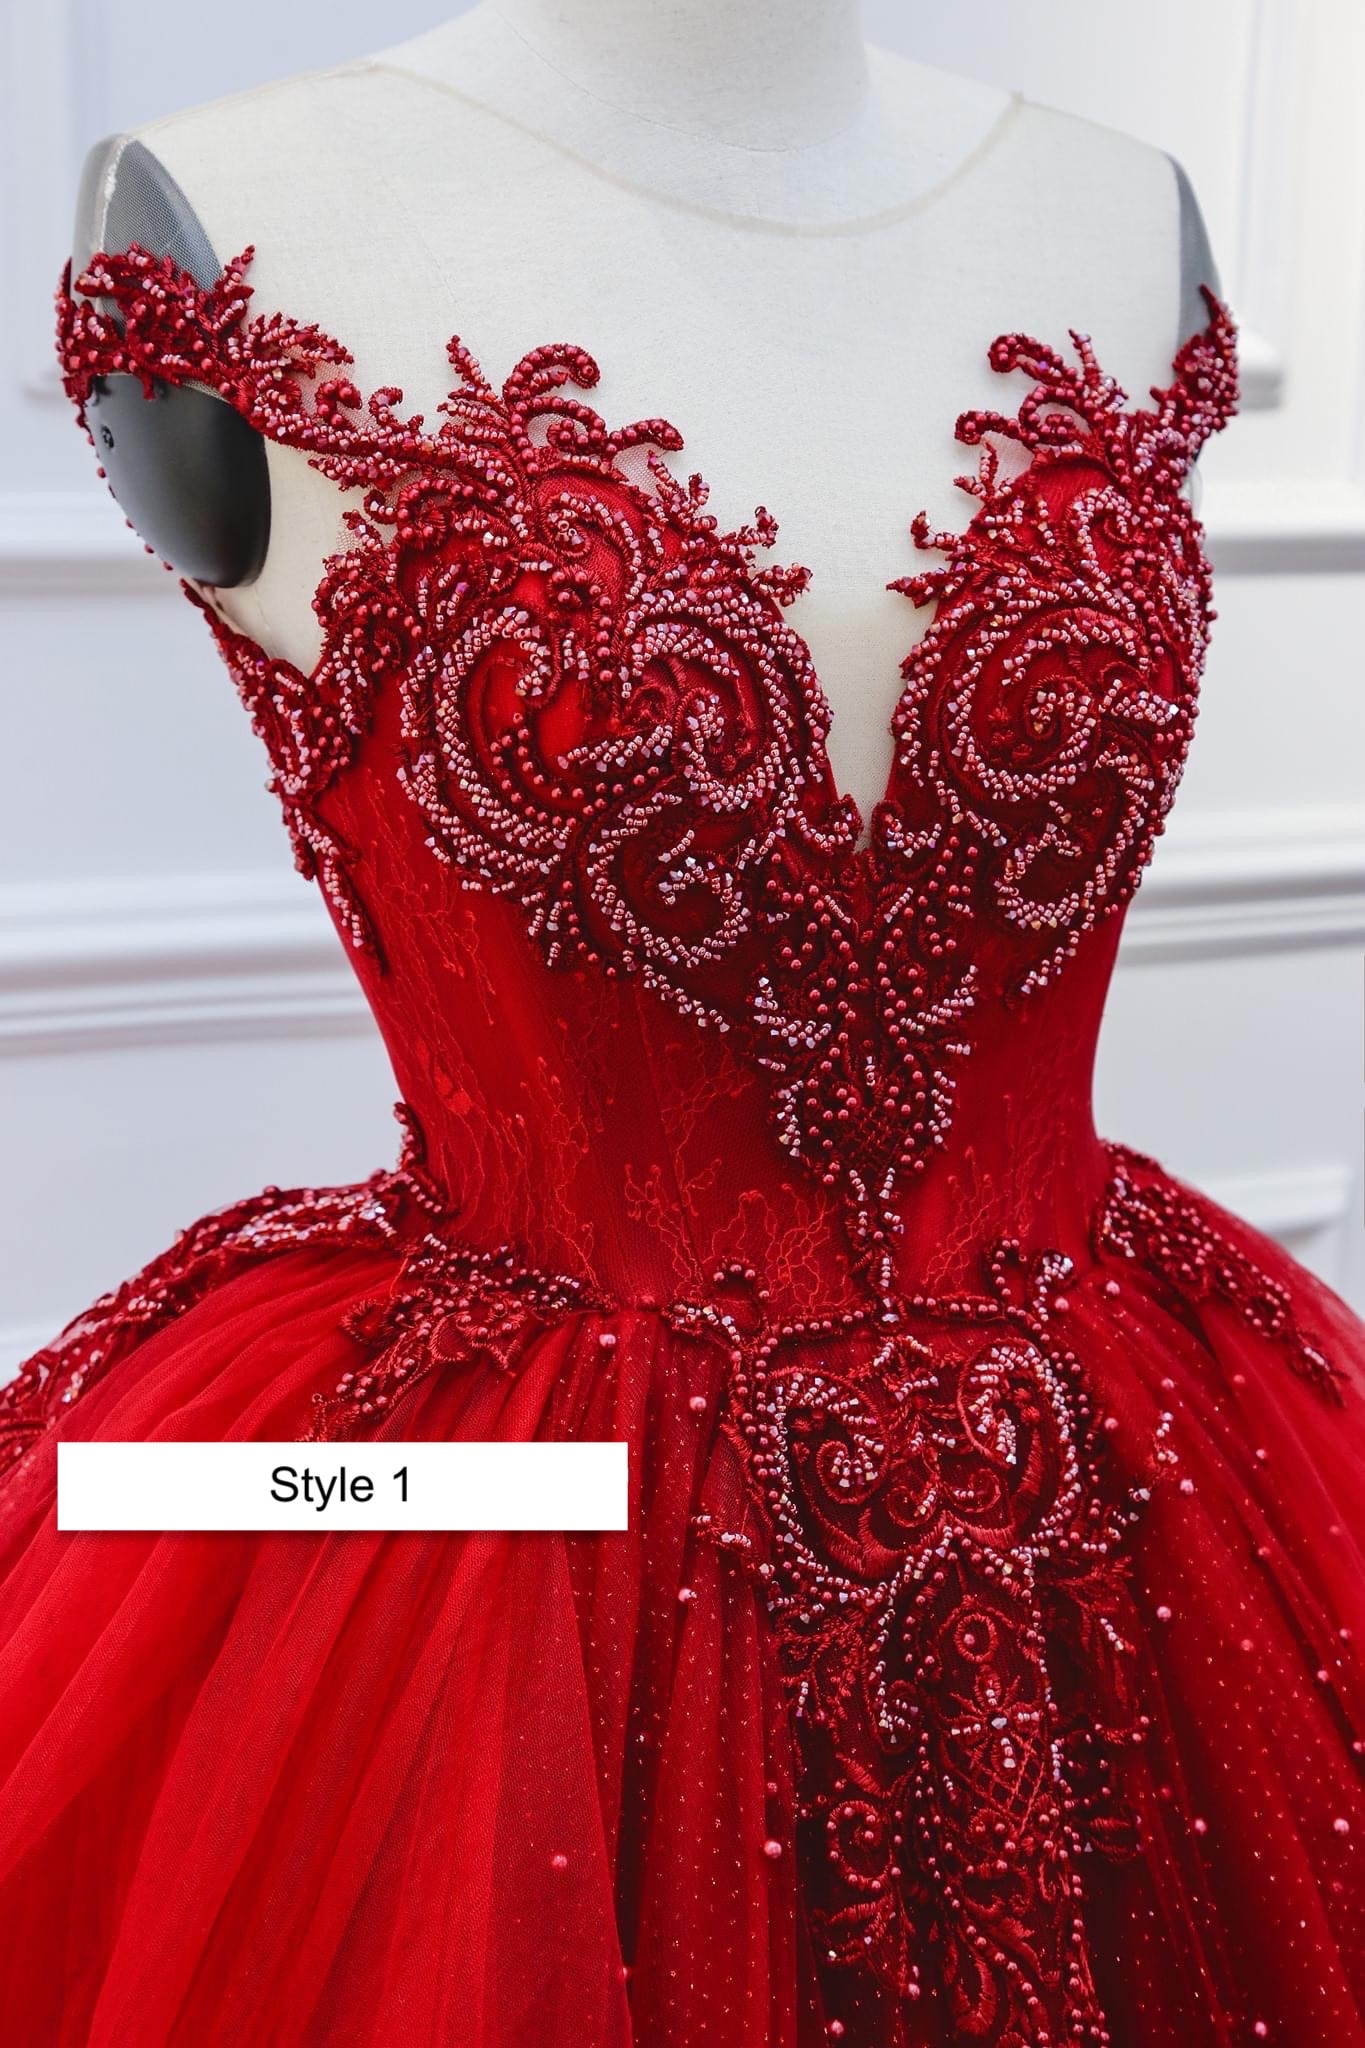 Princess red cap sleeves tiered skirt ball gown wedding/prom dress with ...